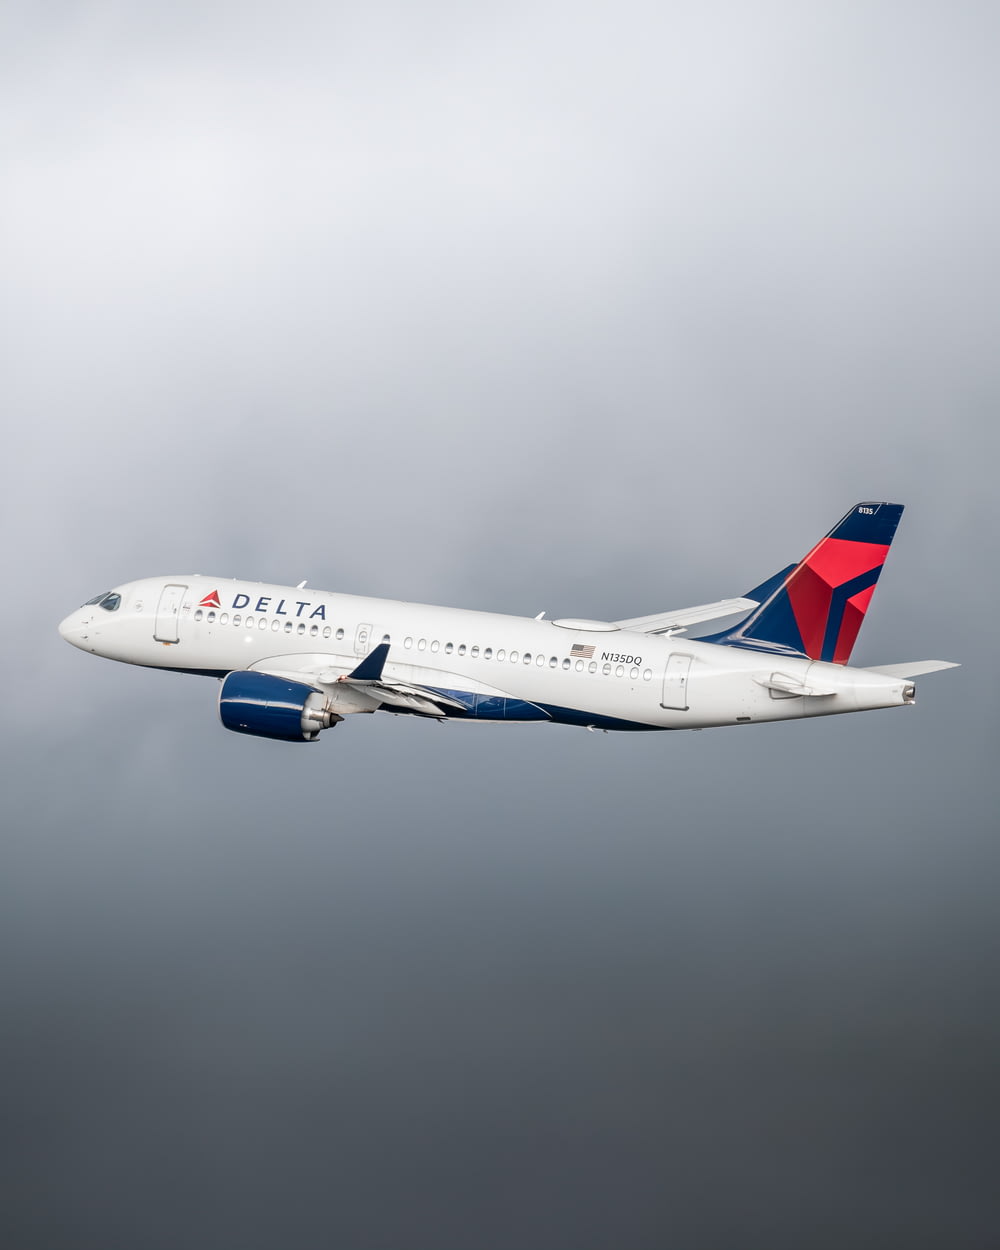 a delta airplane flying in a cloudy sky